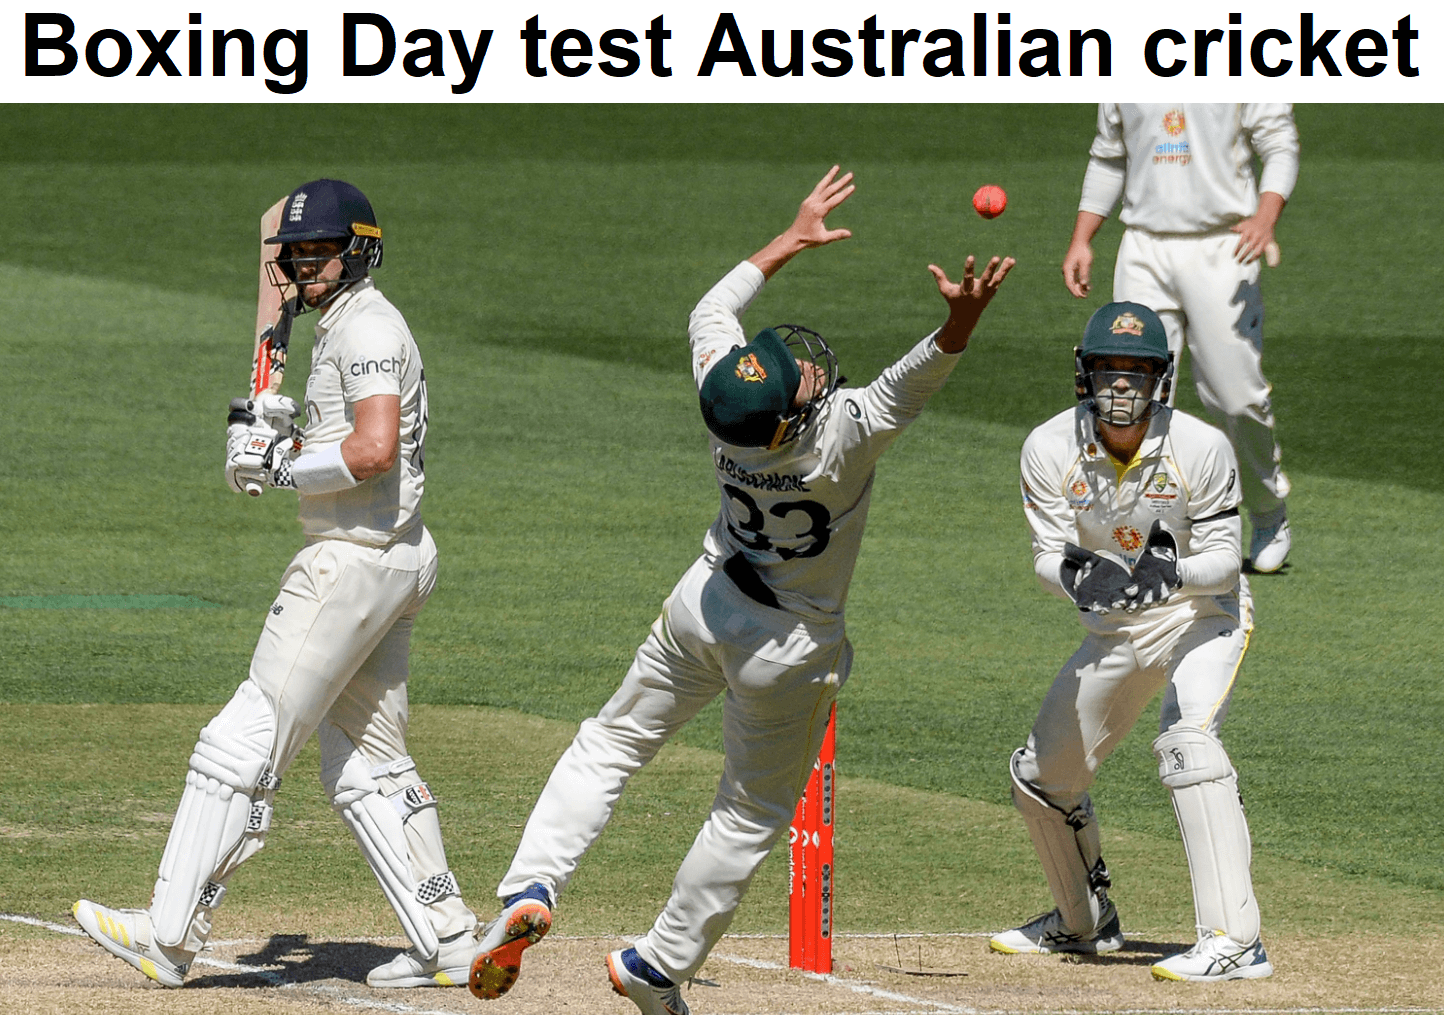 What is a Boxing Day test in Australian cricket?